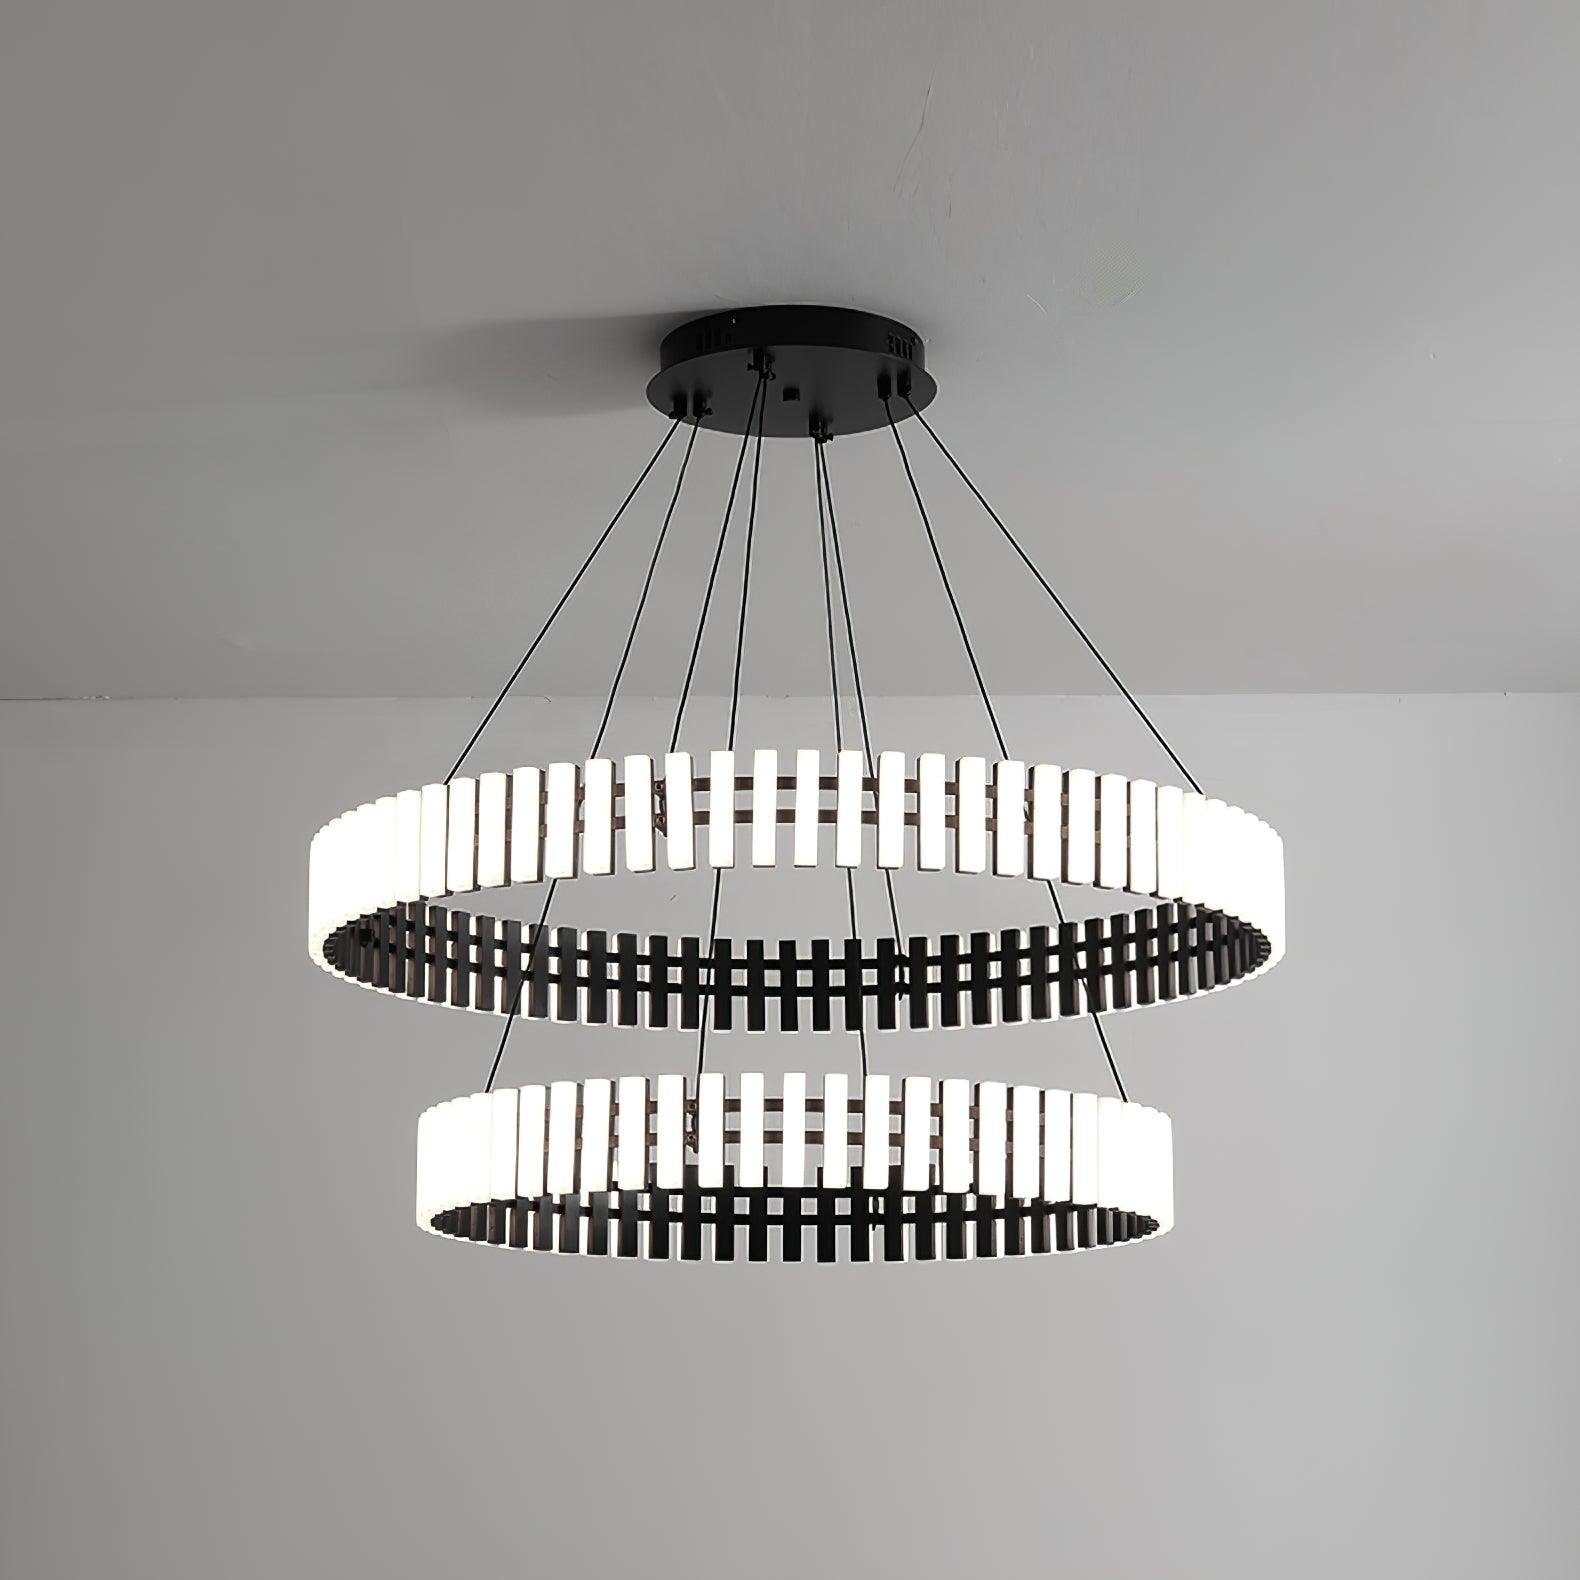 Black or white Hanging LED Chandelier, measuring 15.7" and 23.6" in diameter with a height of 59", emitting a cool light.